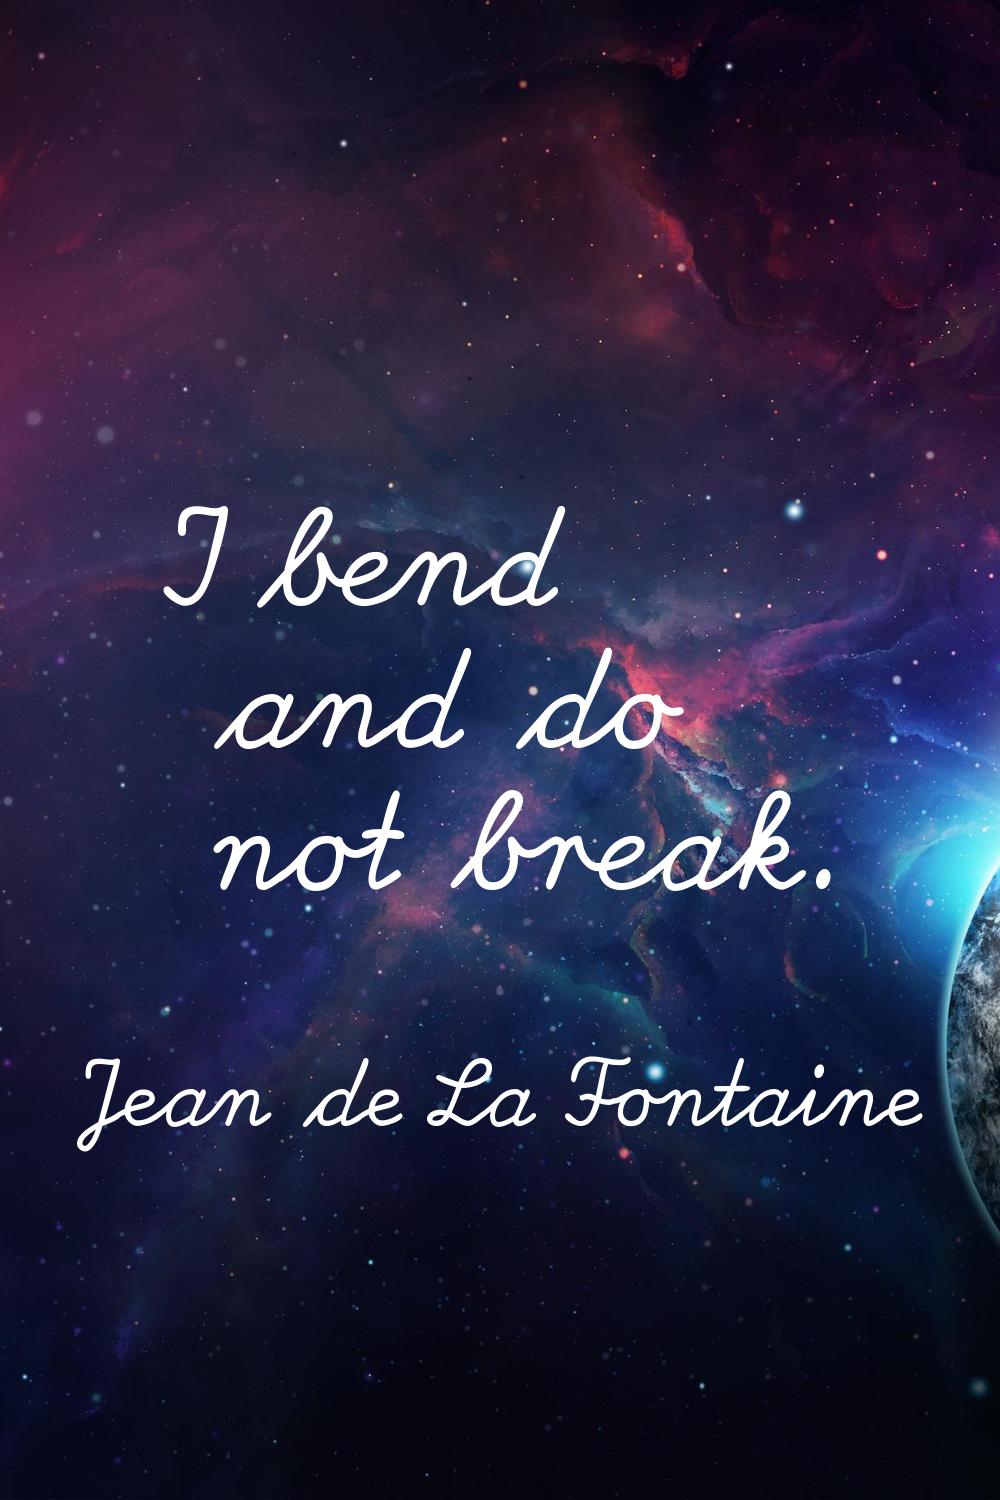 I bend and do not break.